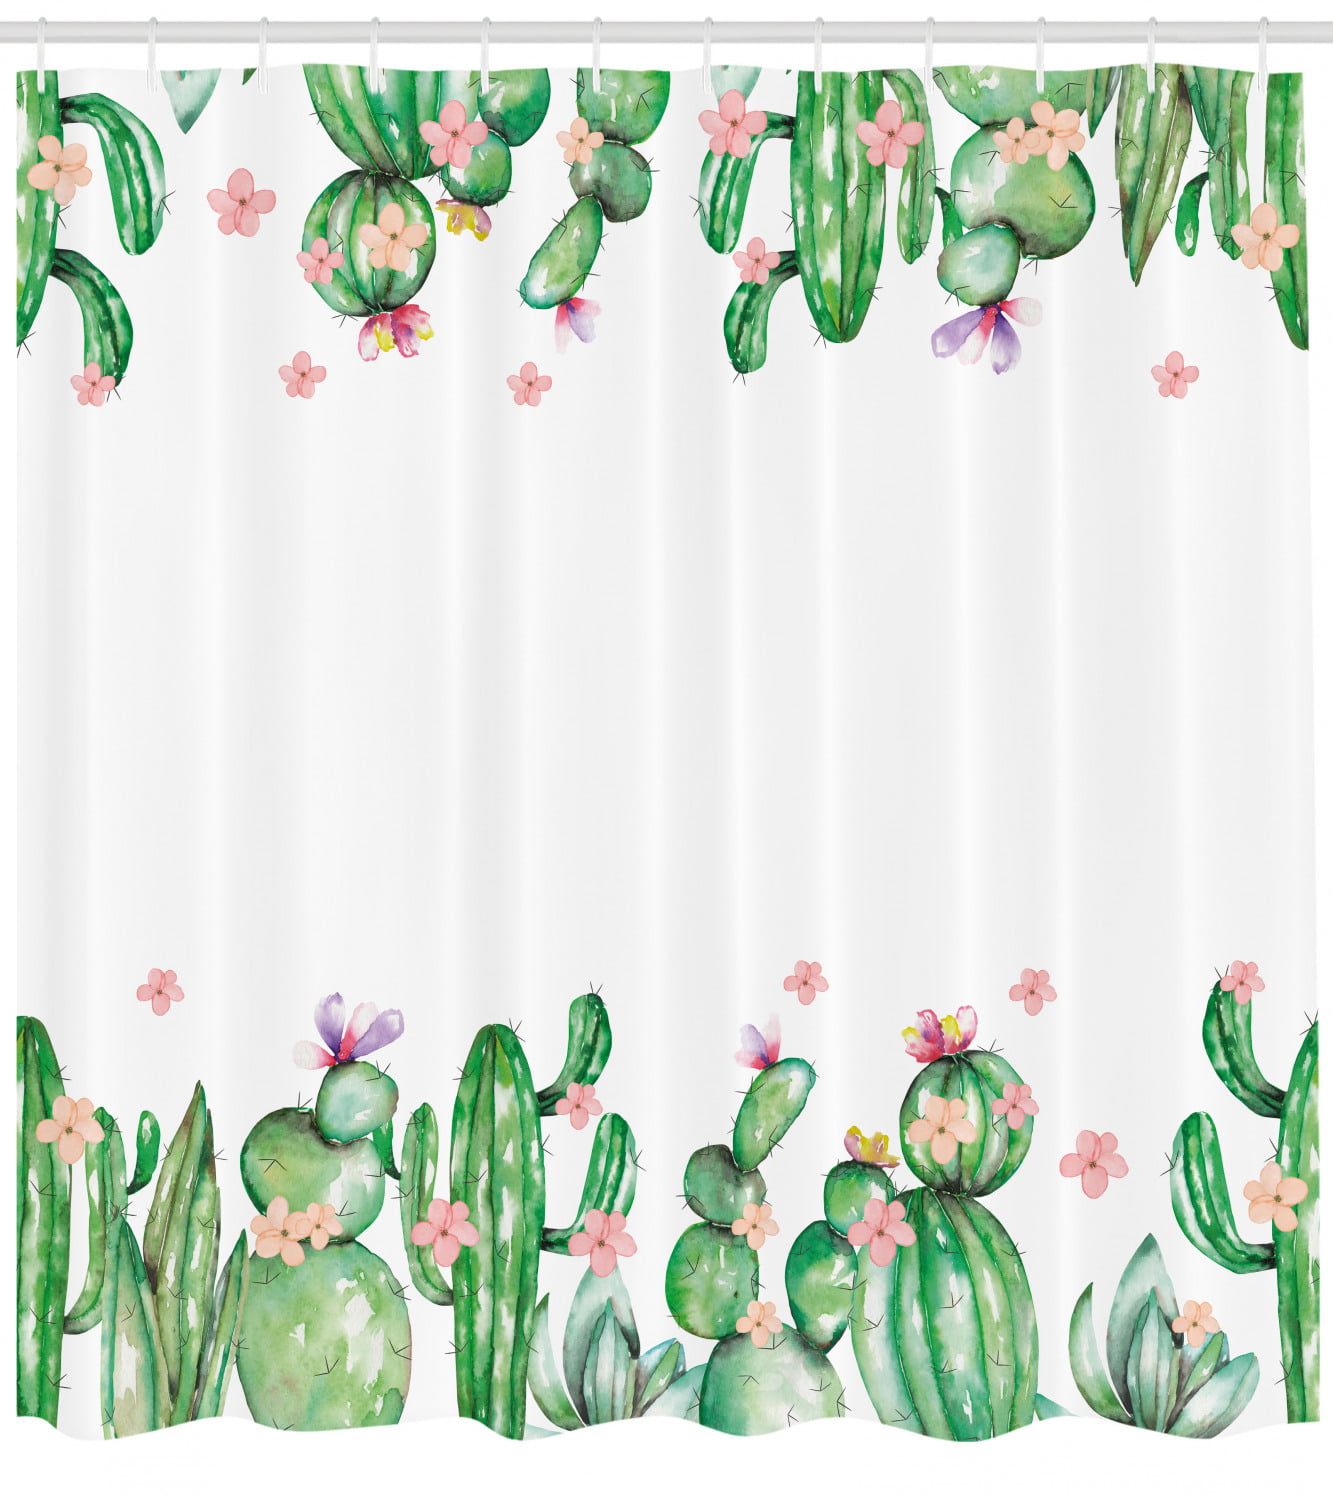 Cactus Shower Curtain, Mexico Style Romantic Tender Blossoms and Barren ...